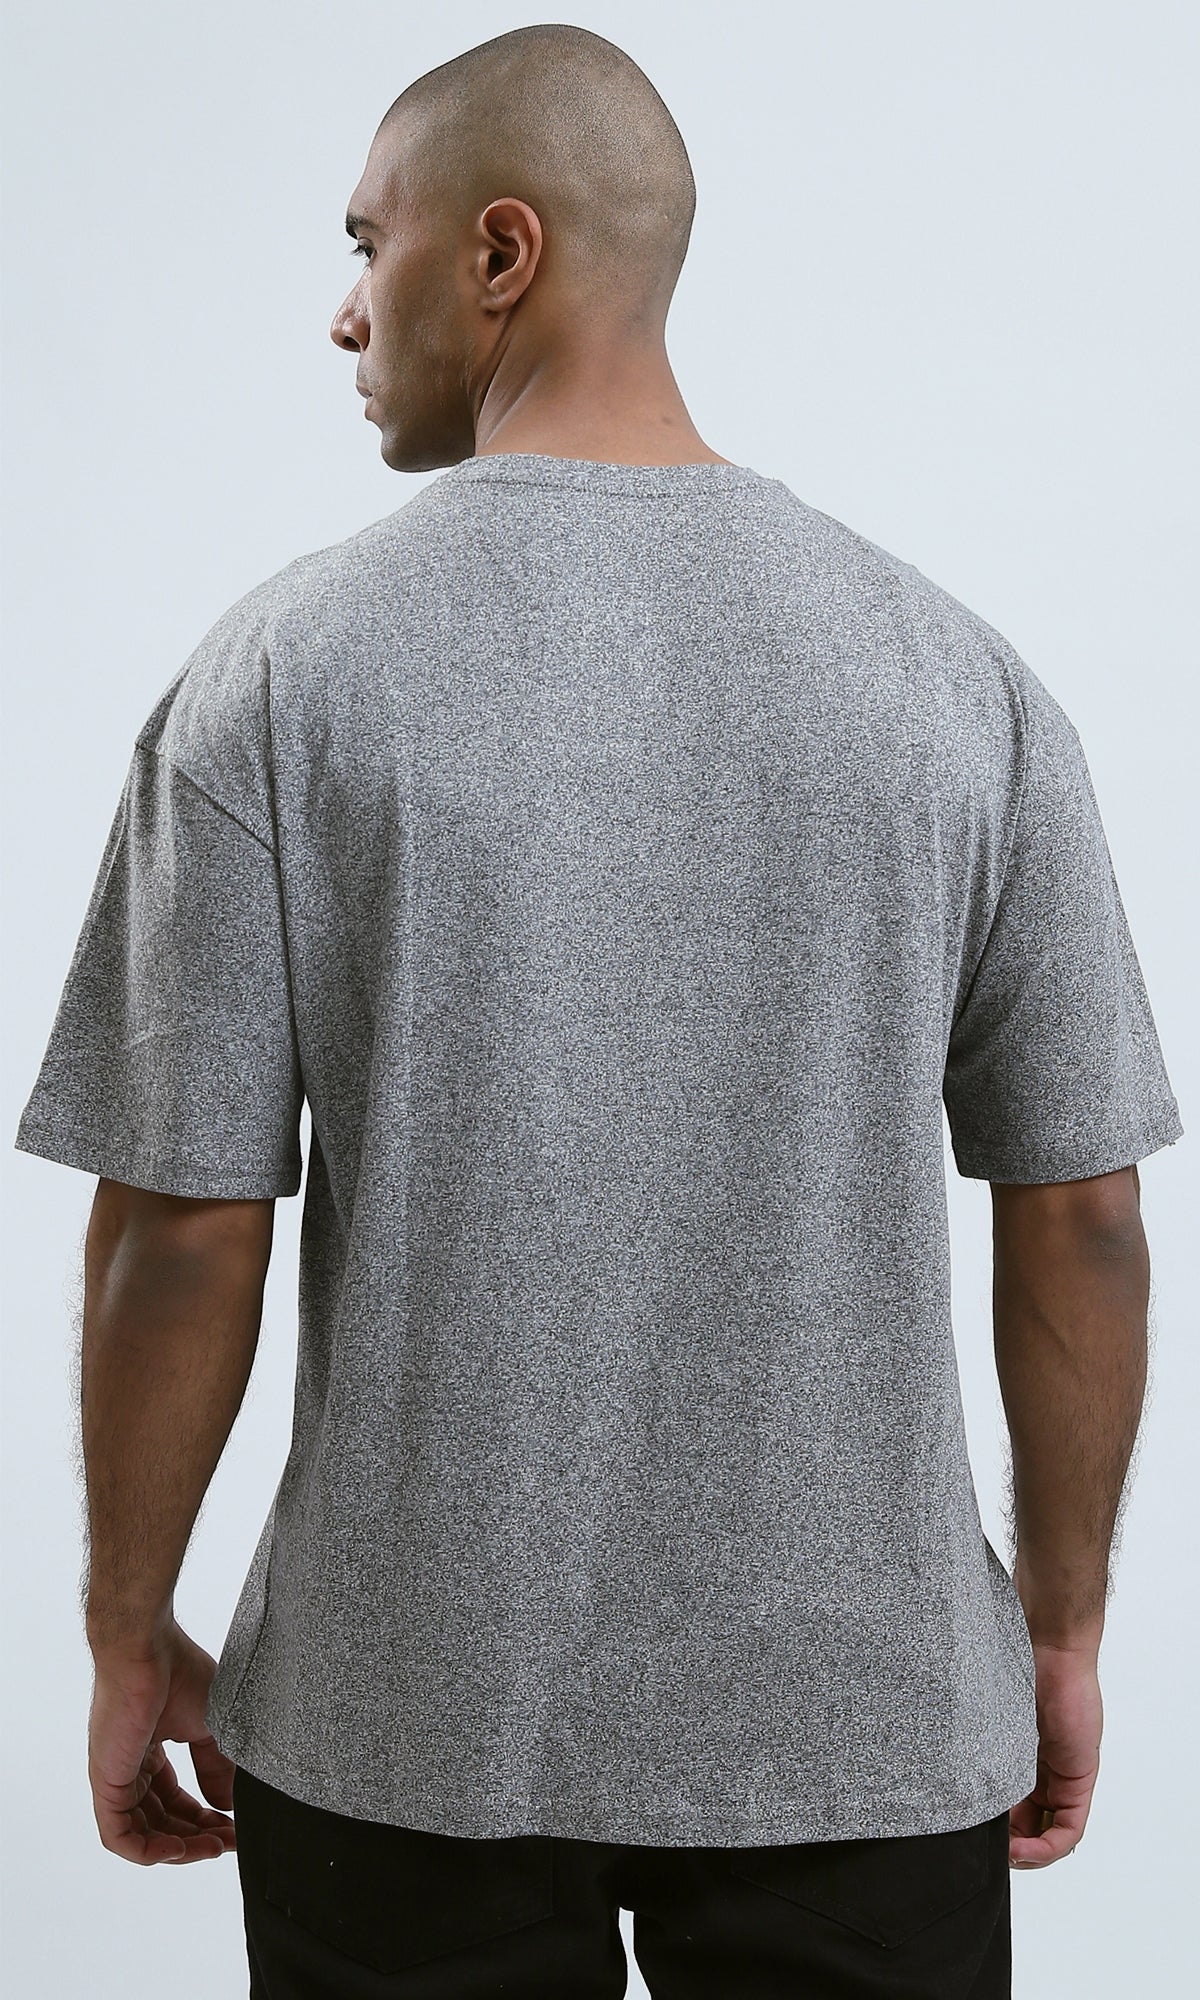 O190743 Fashionable Heather Light Grey Tee With Stitched Details